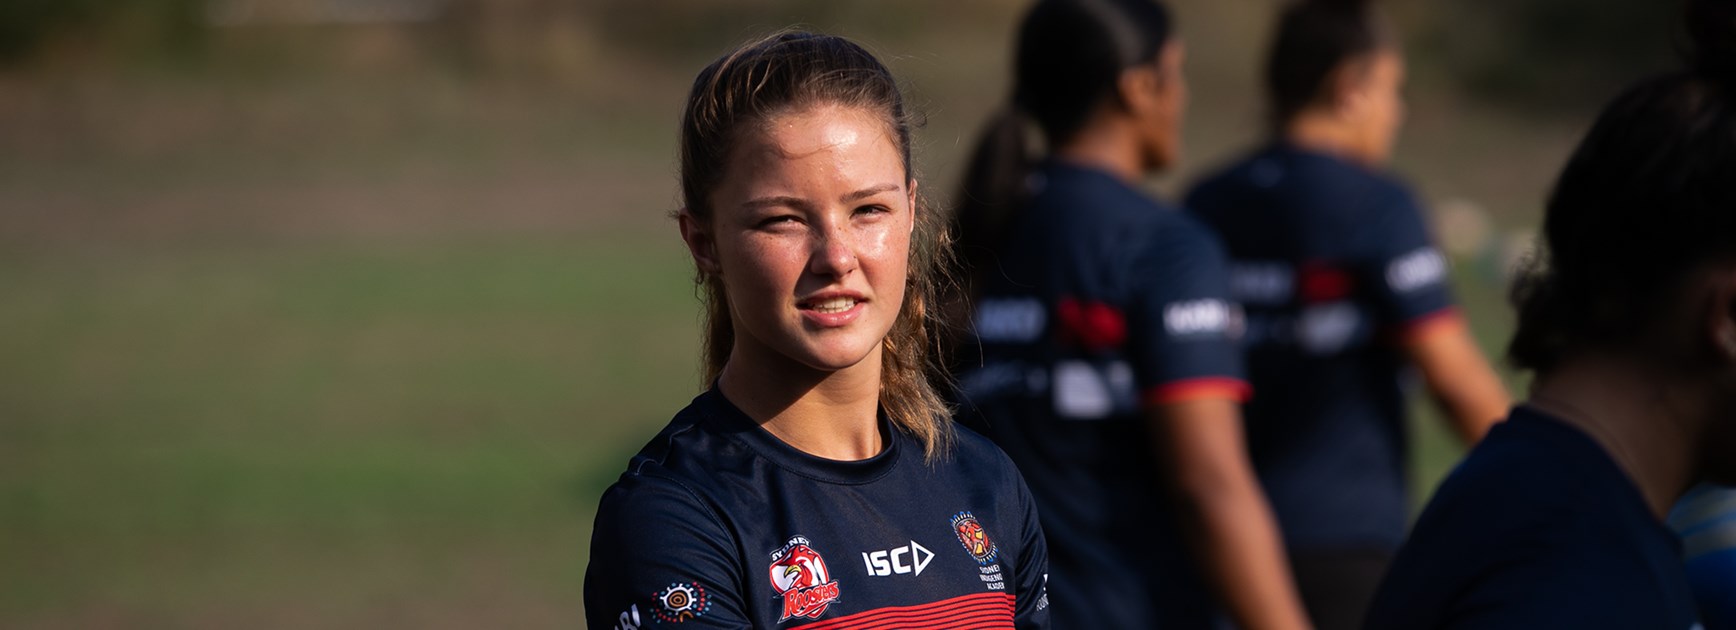 Roosters 2020 Tarsha Gale Squad